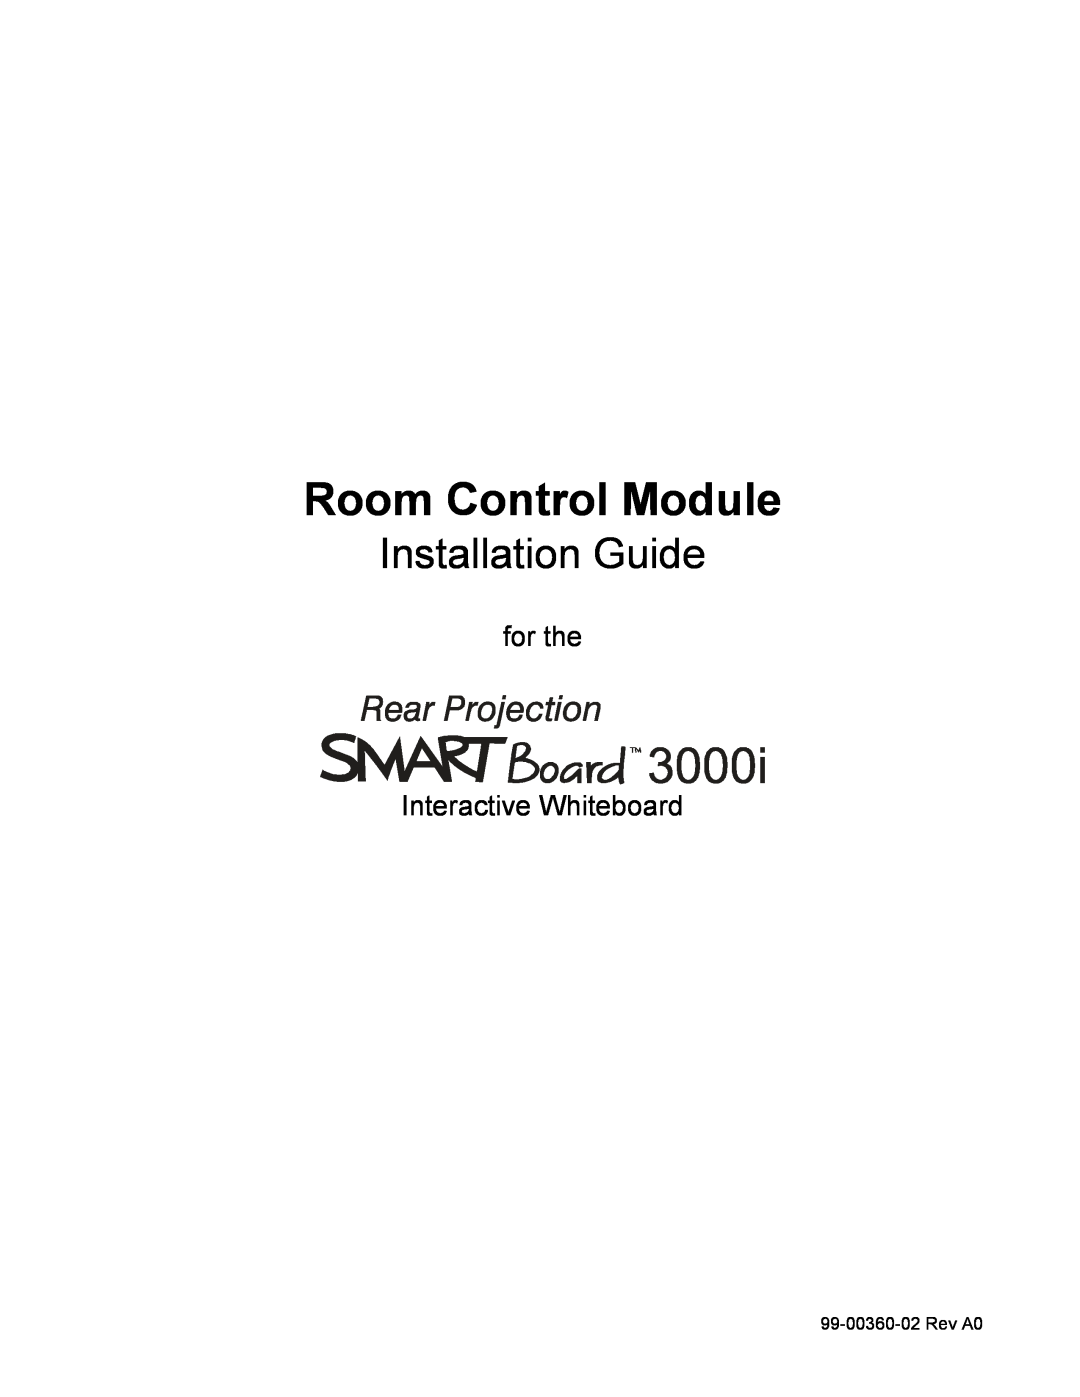 Smart Technologies 3000i manual Room Control Module, Installation Guide, for the Interactive Whiteboard 